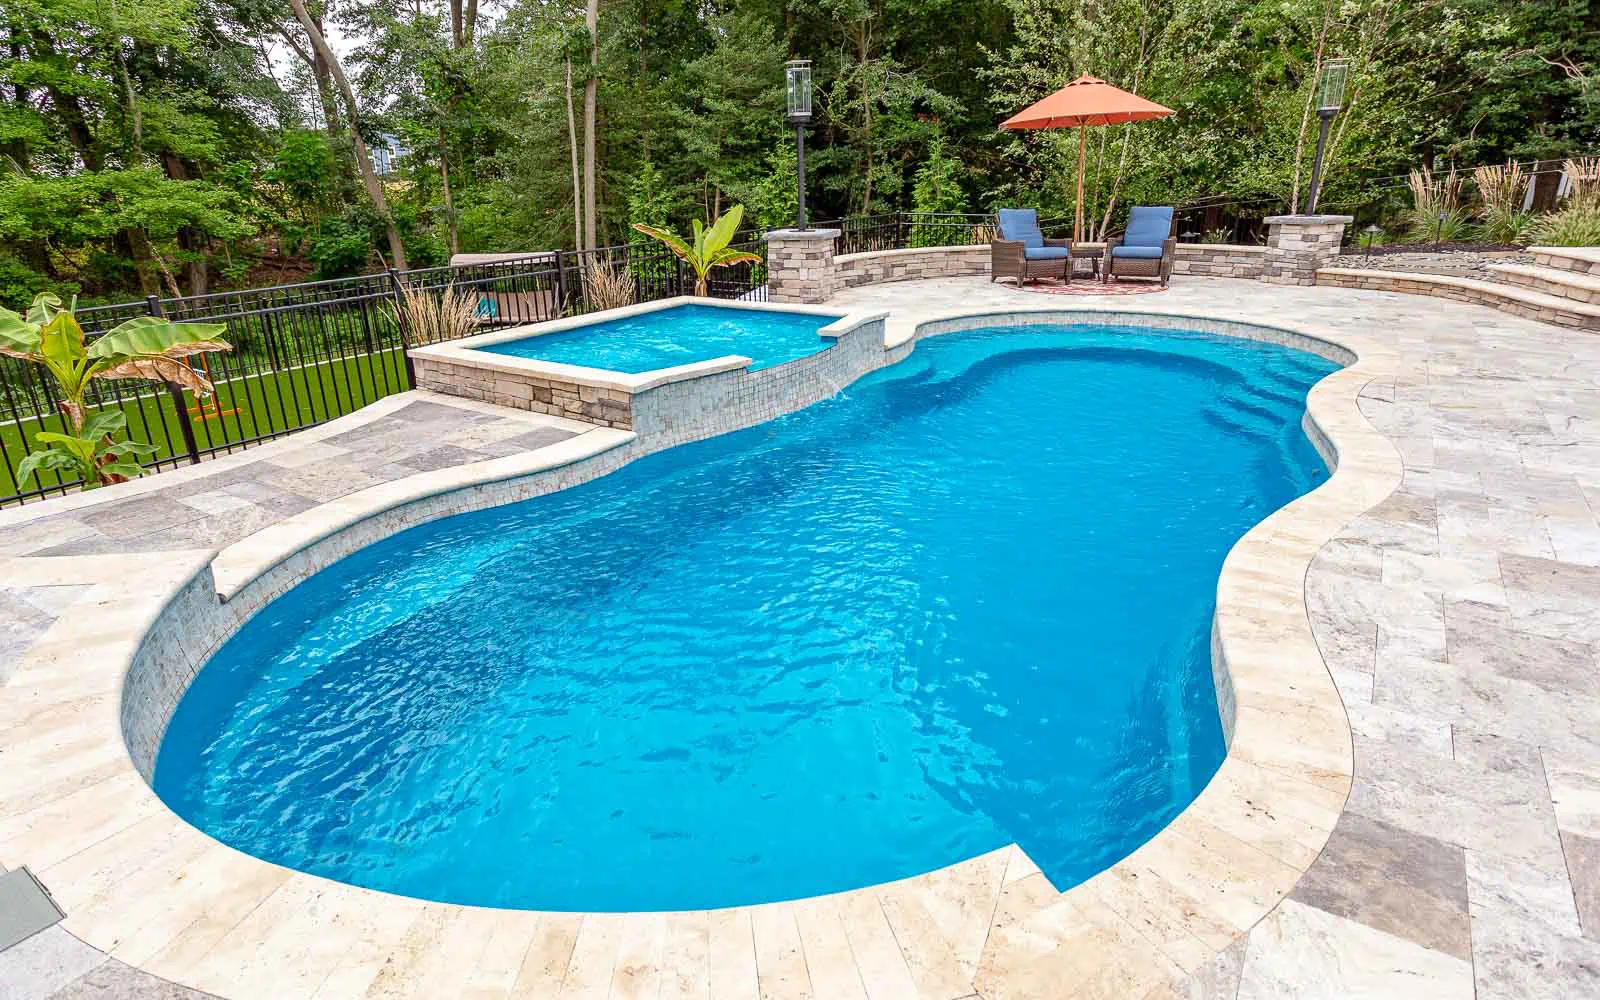 The Riviera, a fiberglass pool design manufactured by Leisure Pools